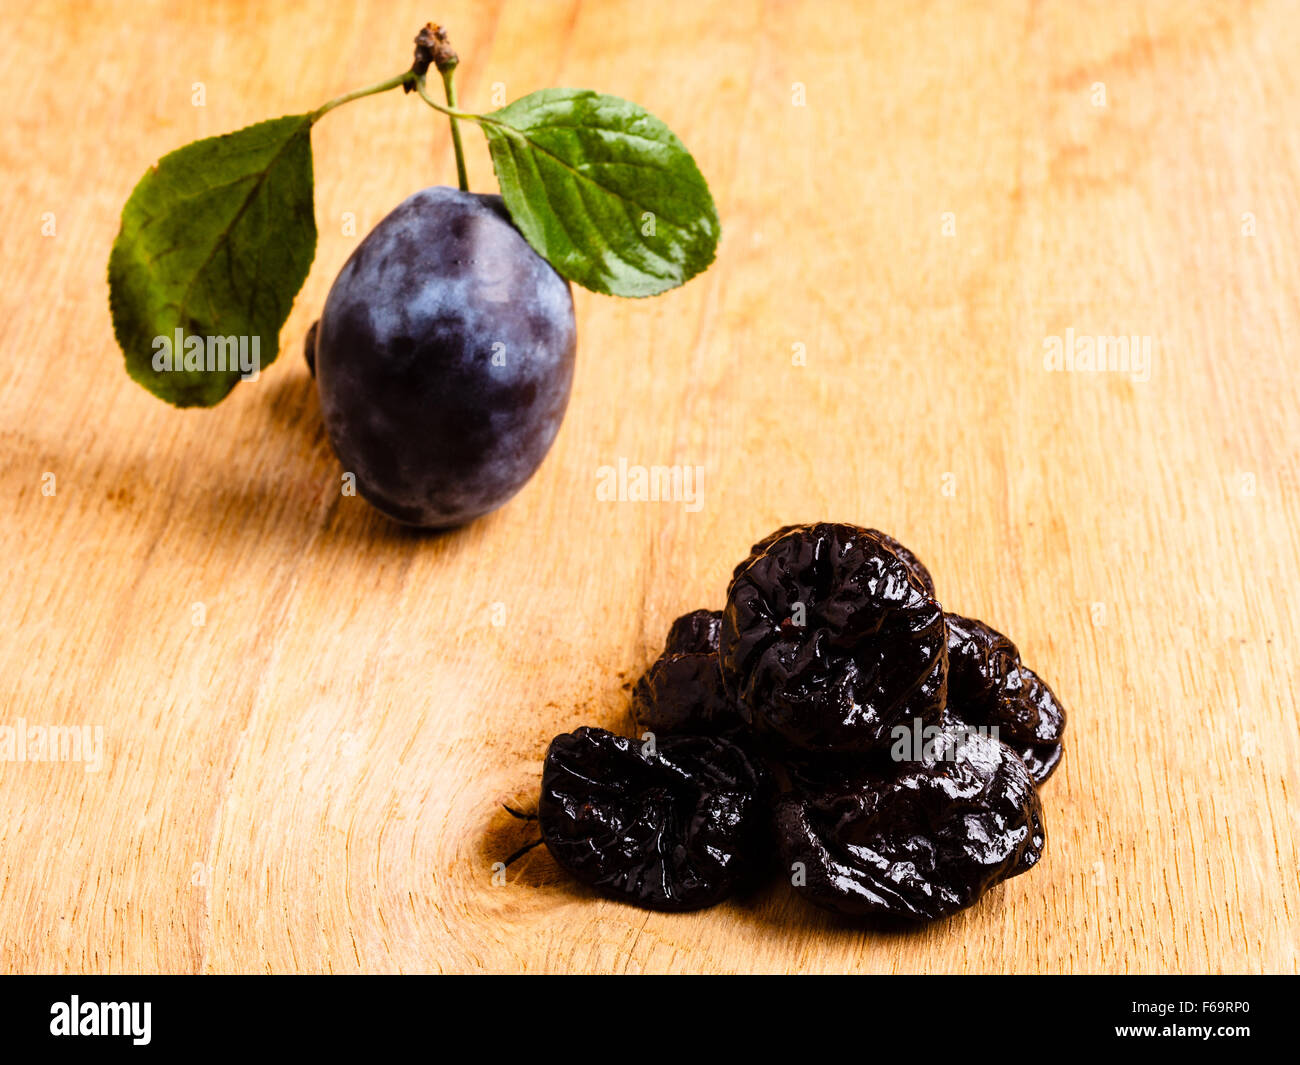 Healthy food, good cuisine. Closeup dried plums and fresh prune fruit on wooden rustic table Stock Photo